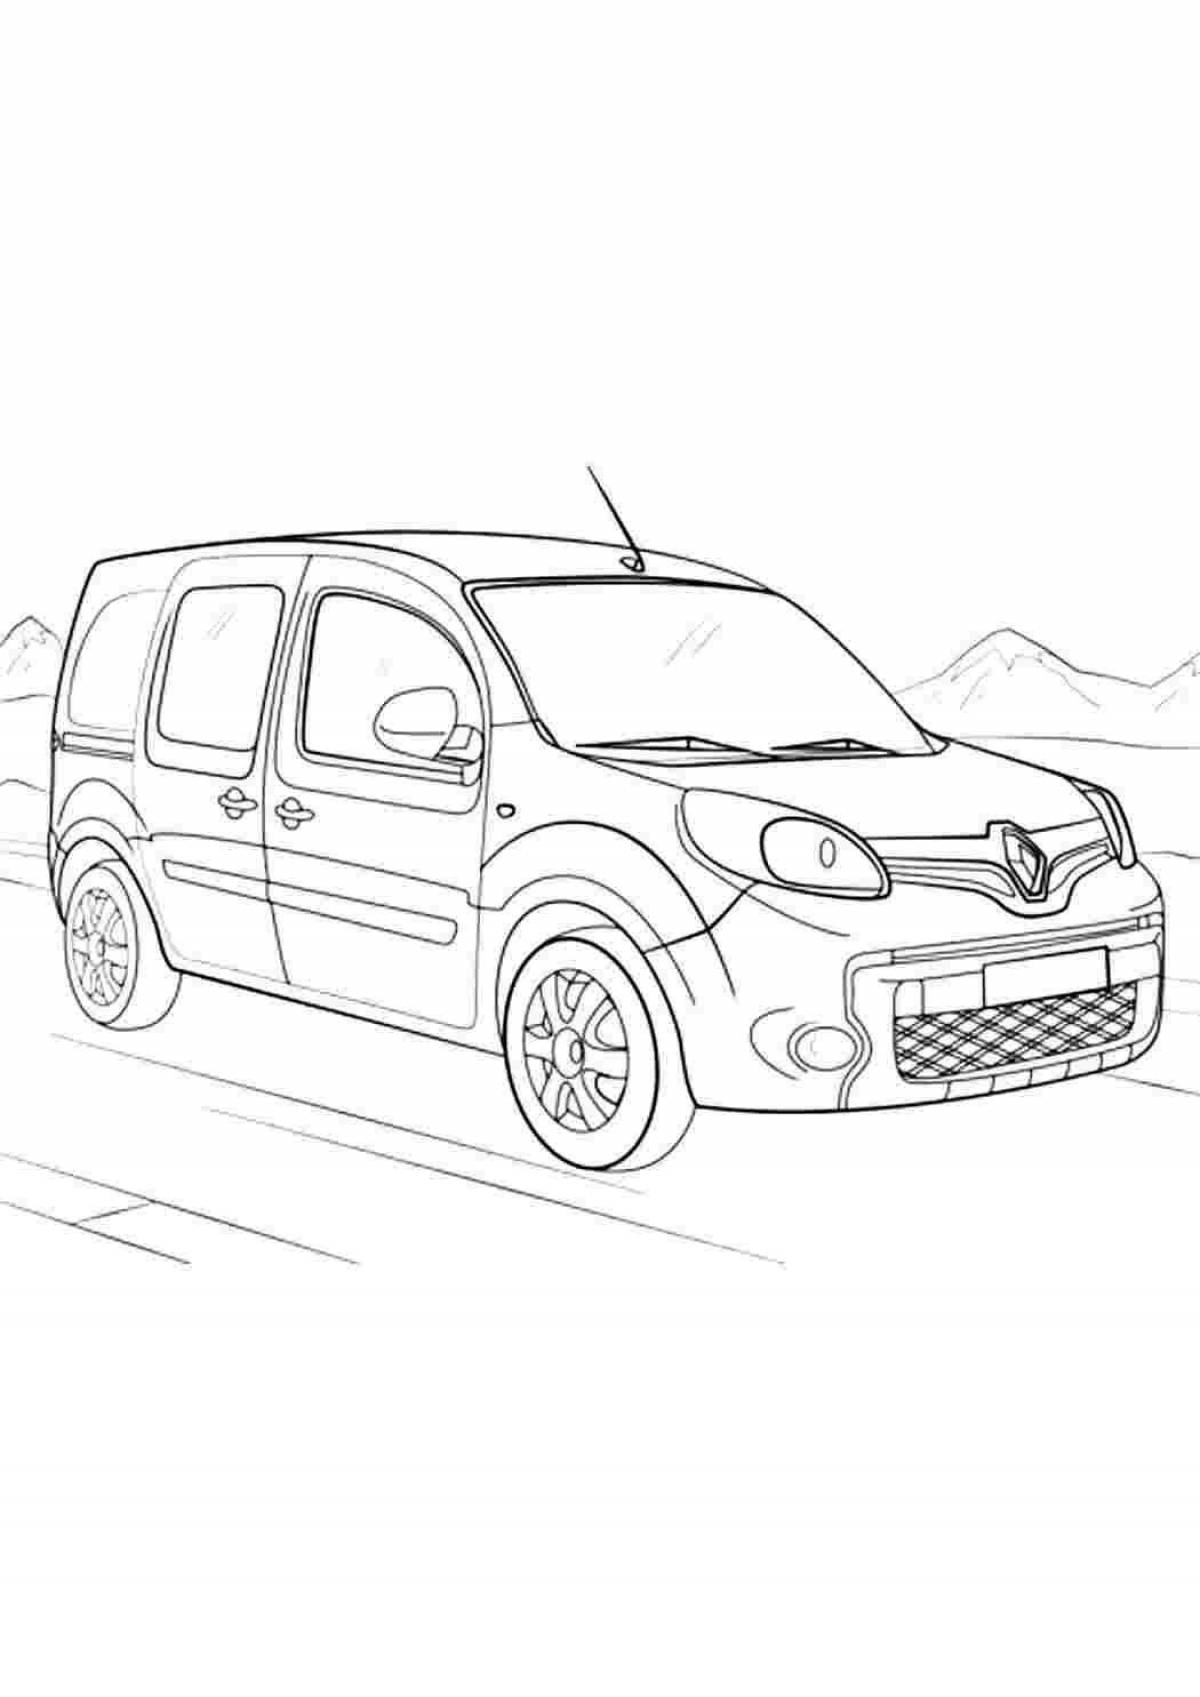 Innovative renault duster coloring page